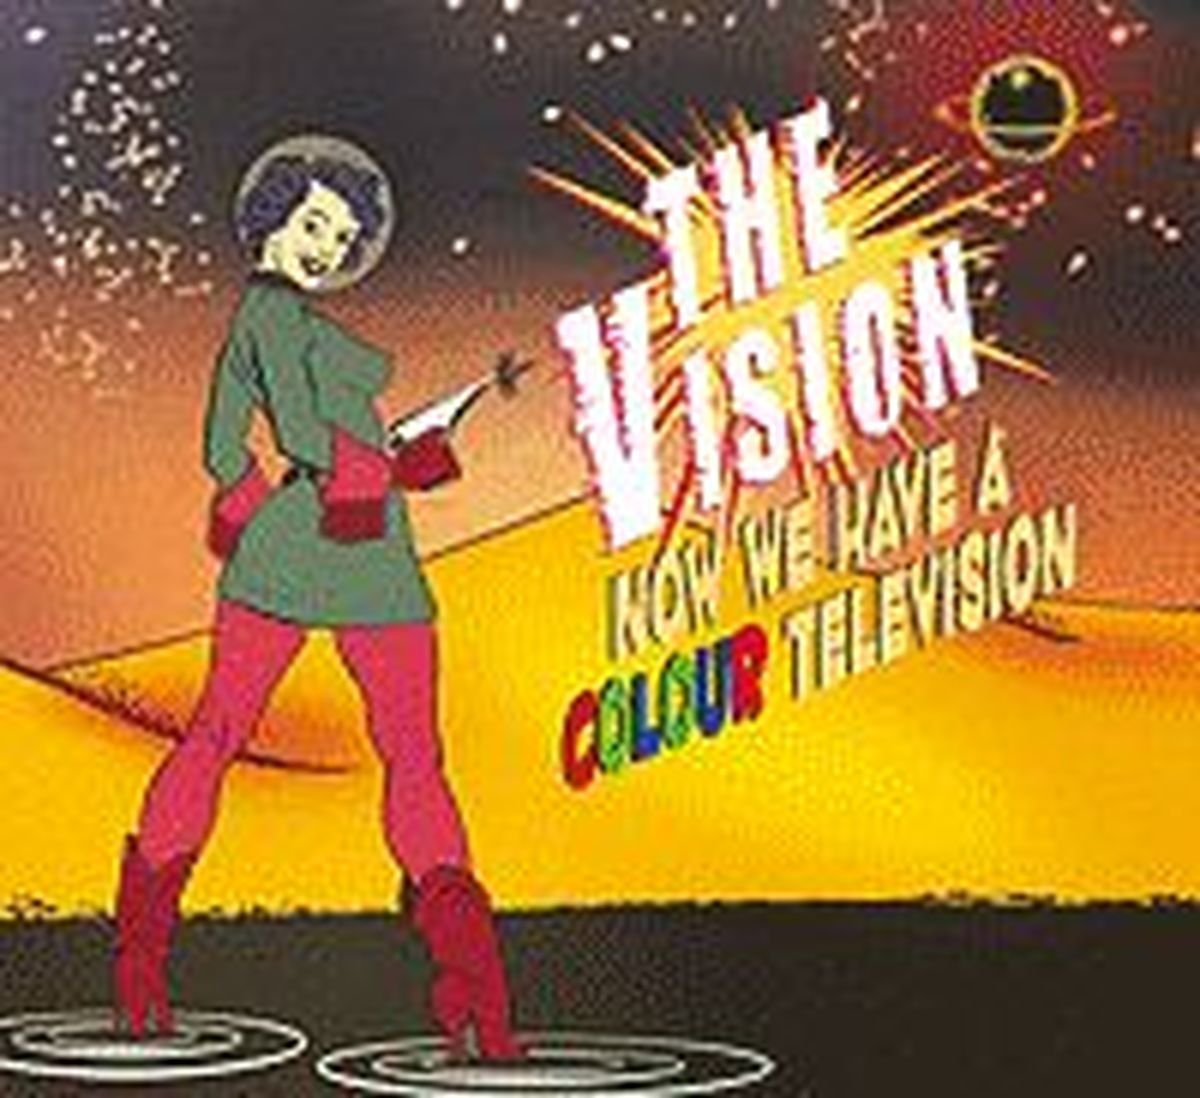 TheVision